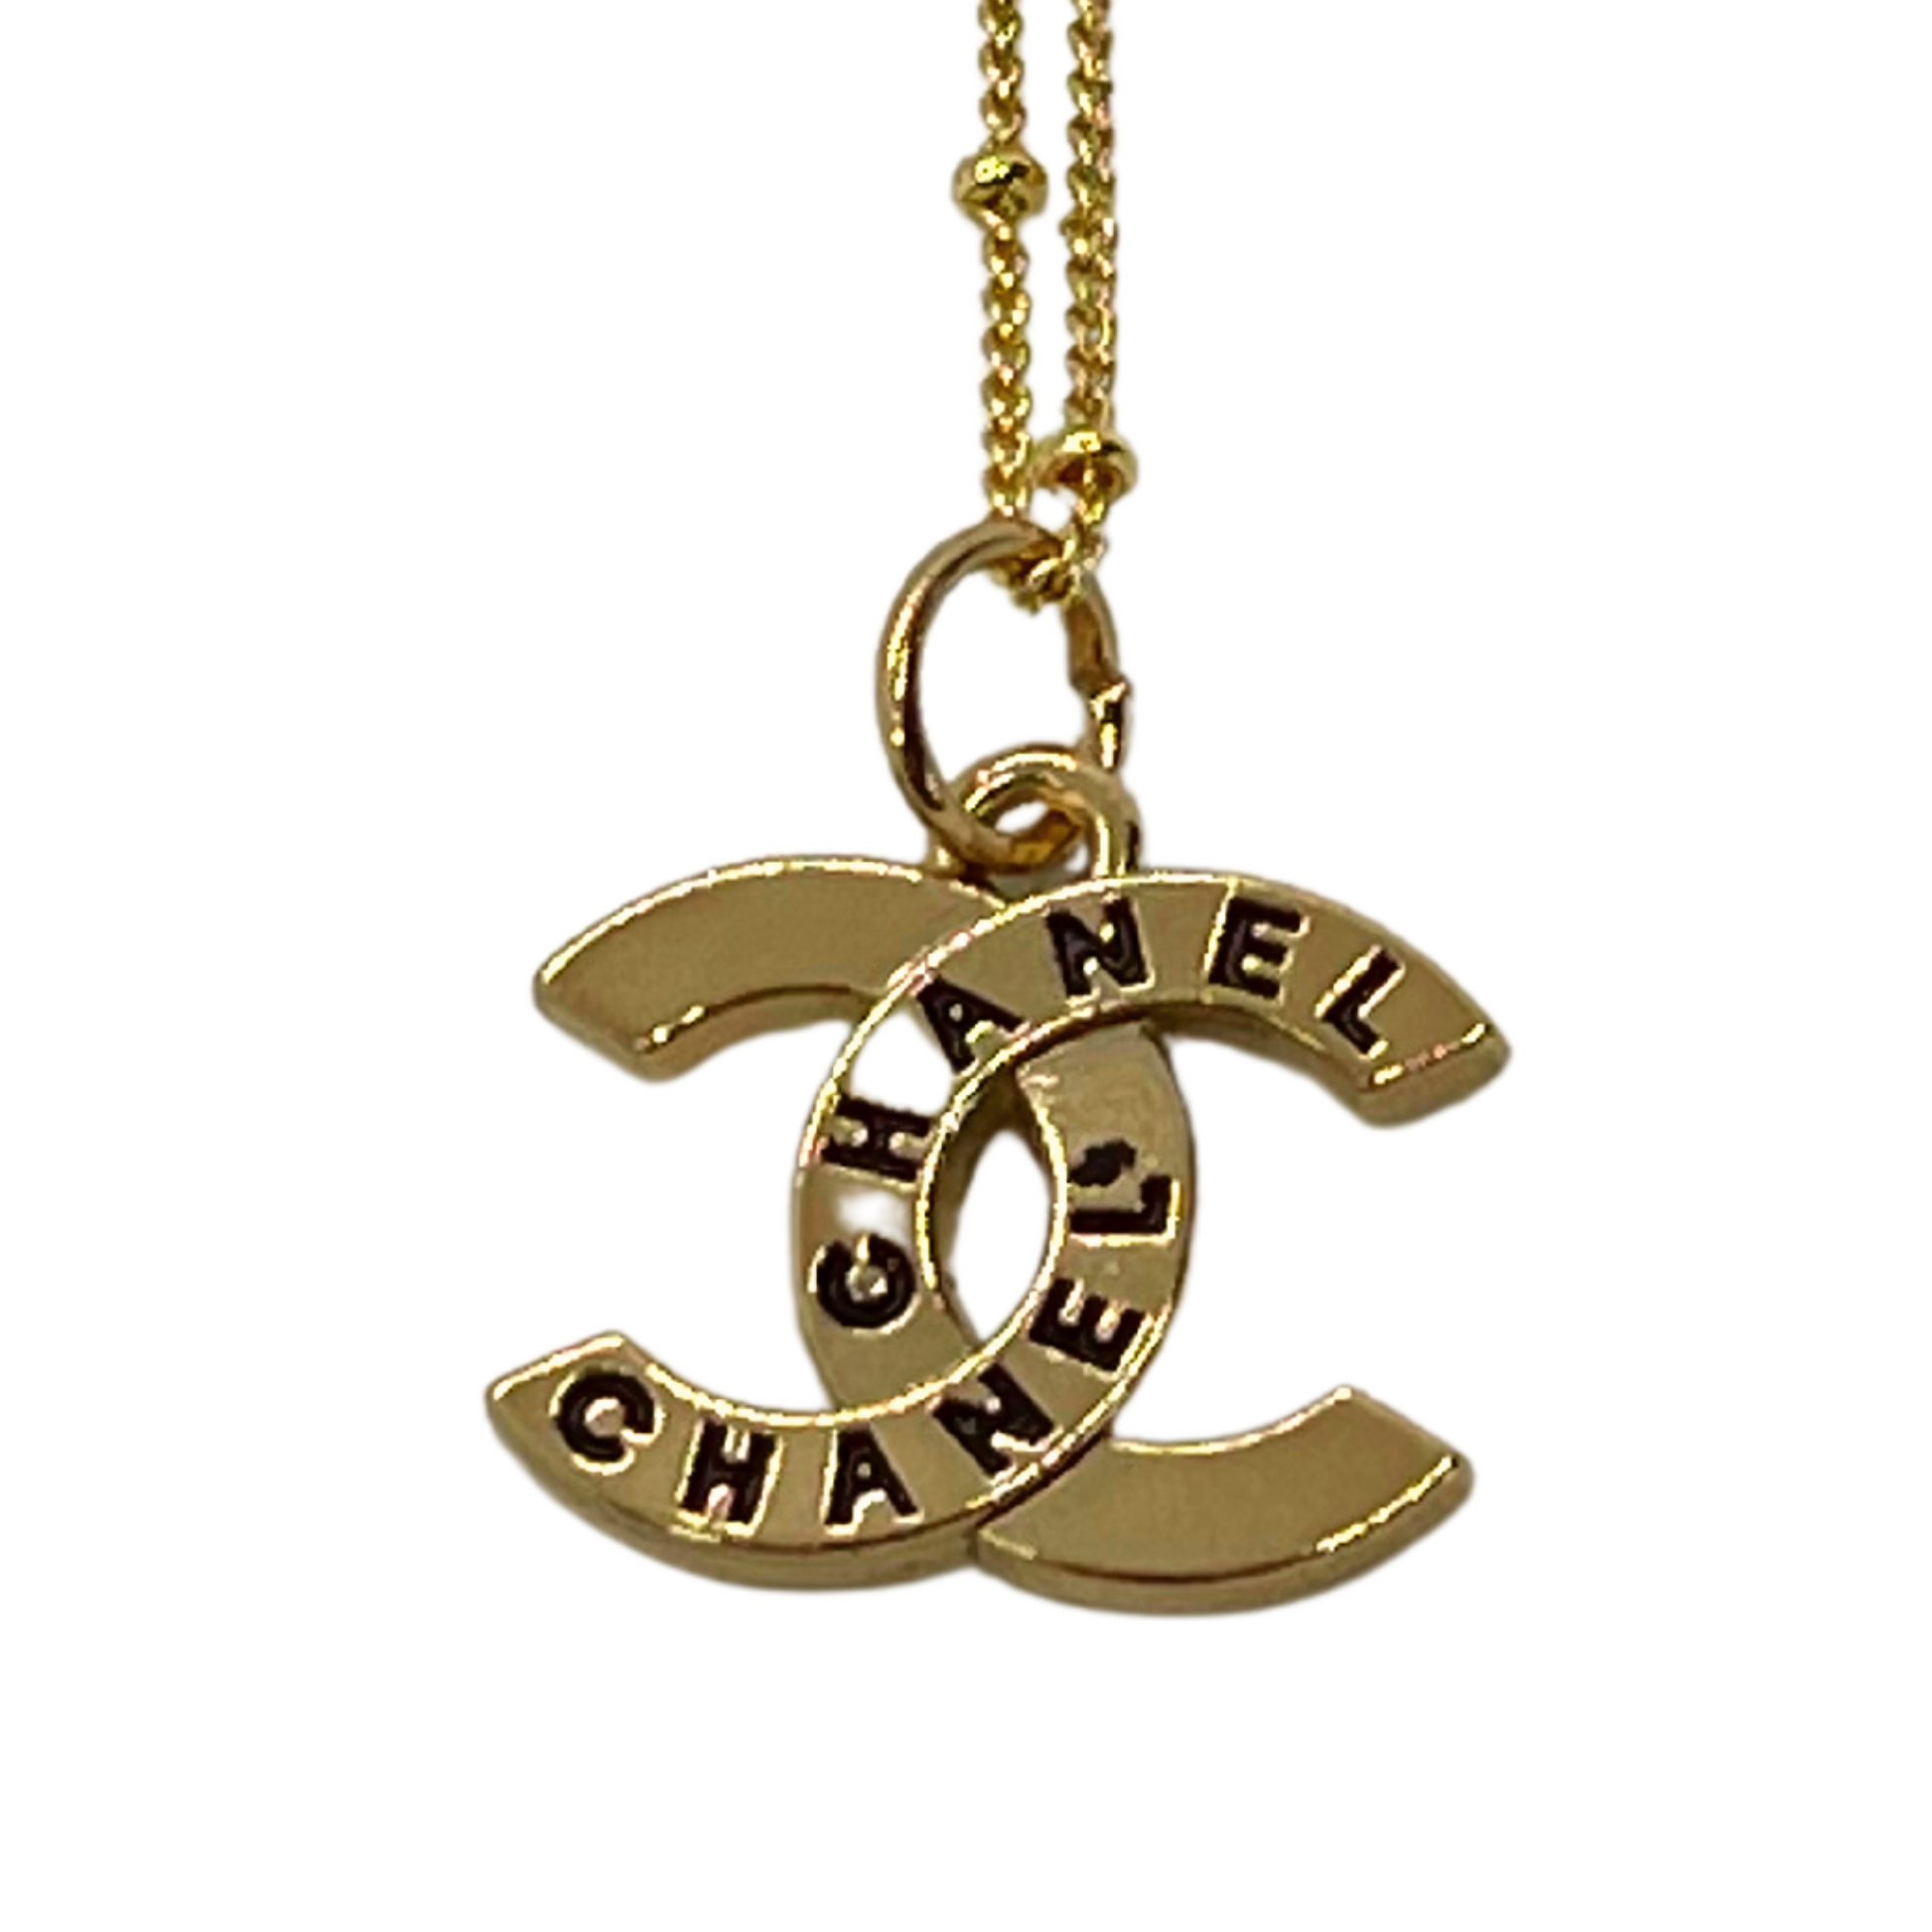 Authentic Reworked Chanel Necklace Design 2